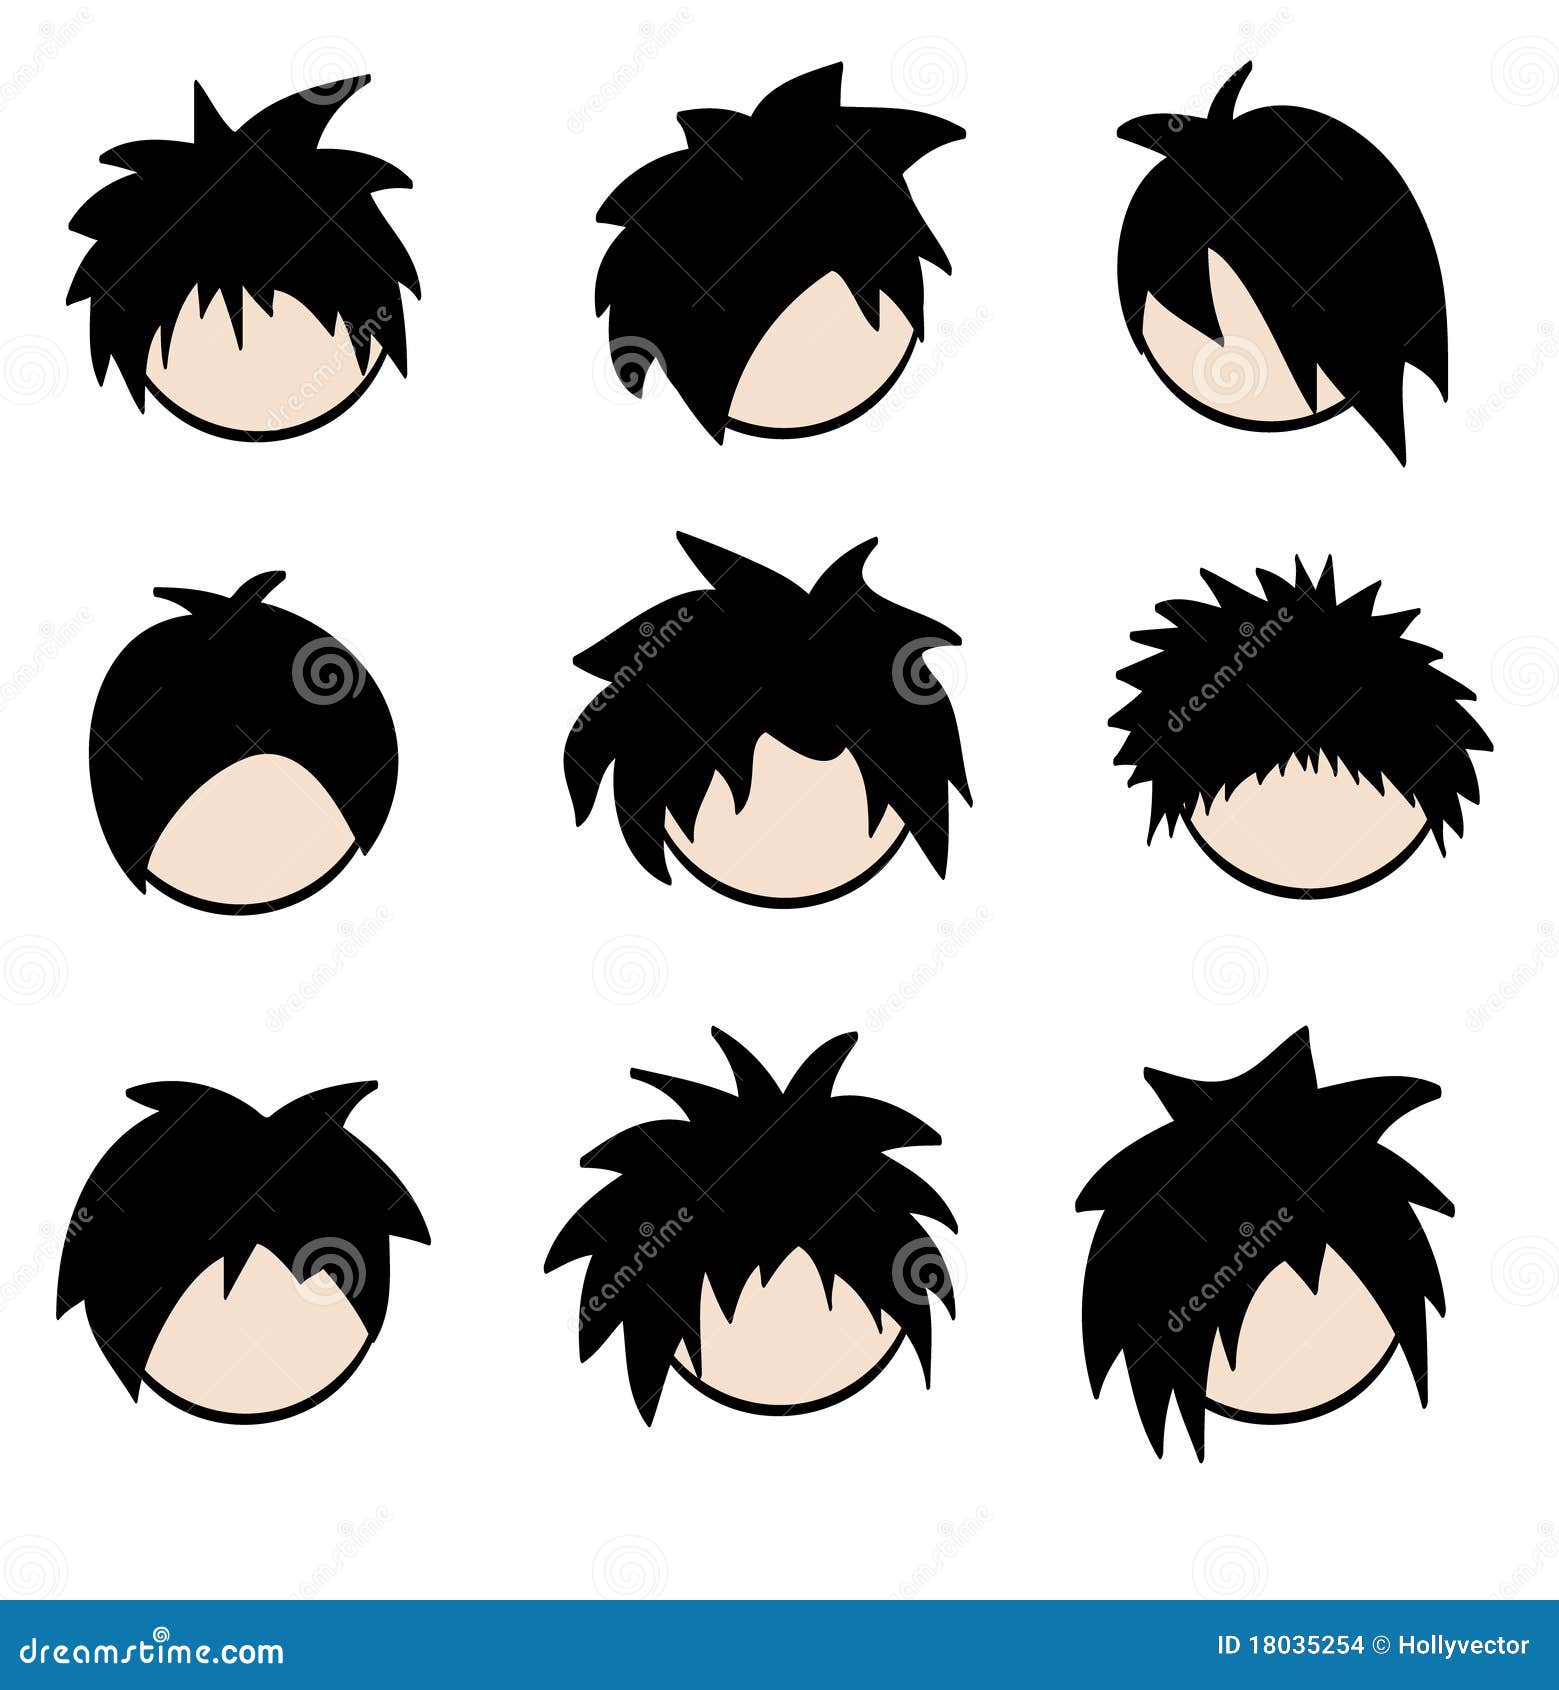 40 Cute Emo Hairstyles for Teens (Boys and Girls) – Buzz16